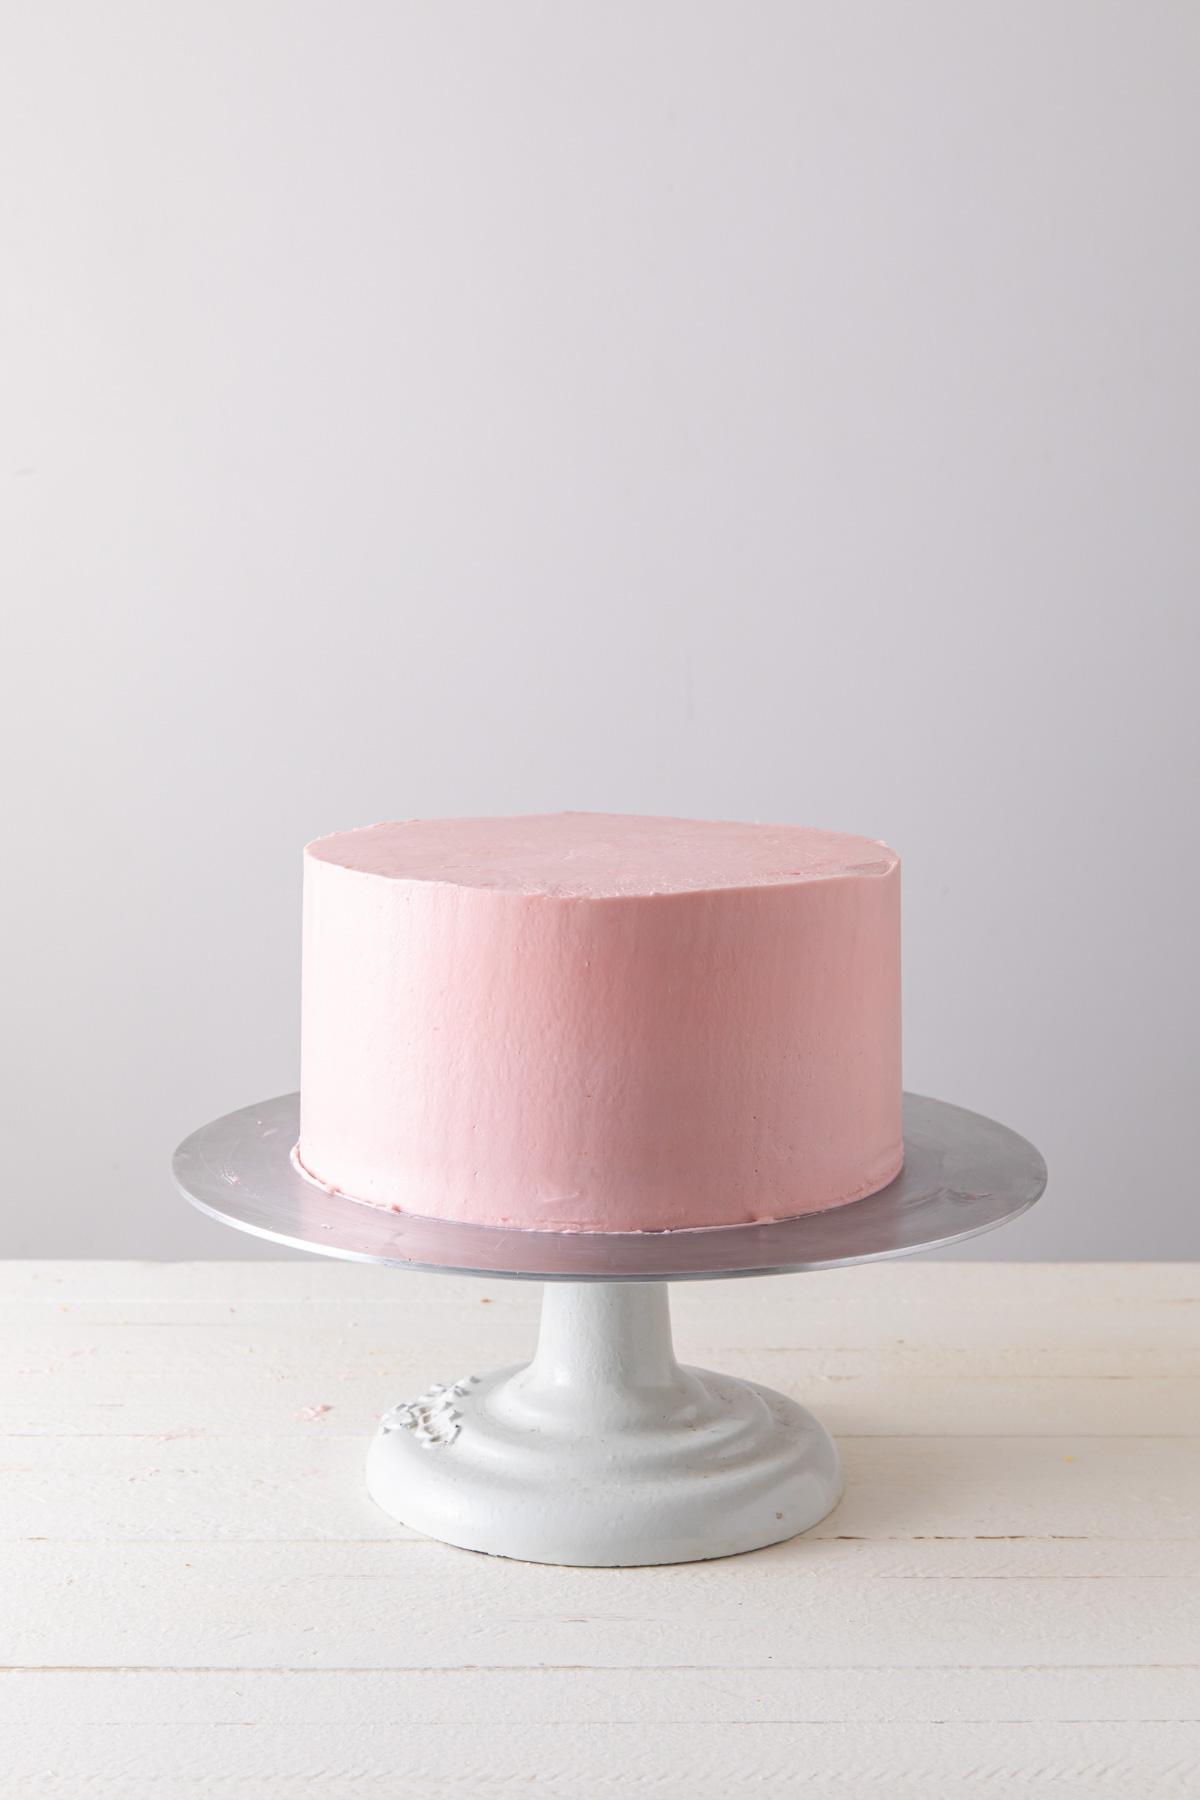 A smoothly frosted cake with pink Swiss meringue buttercream